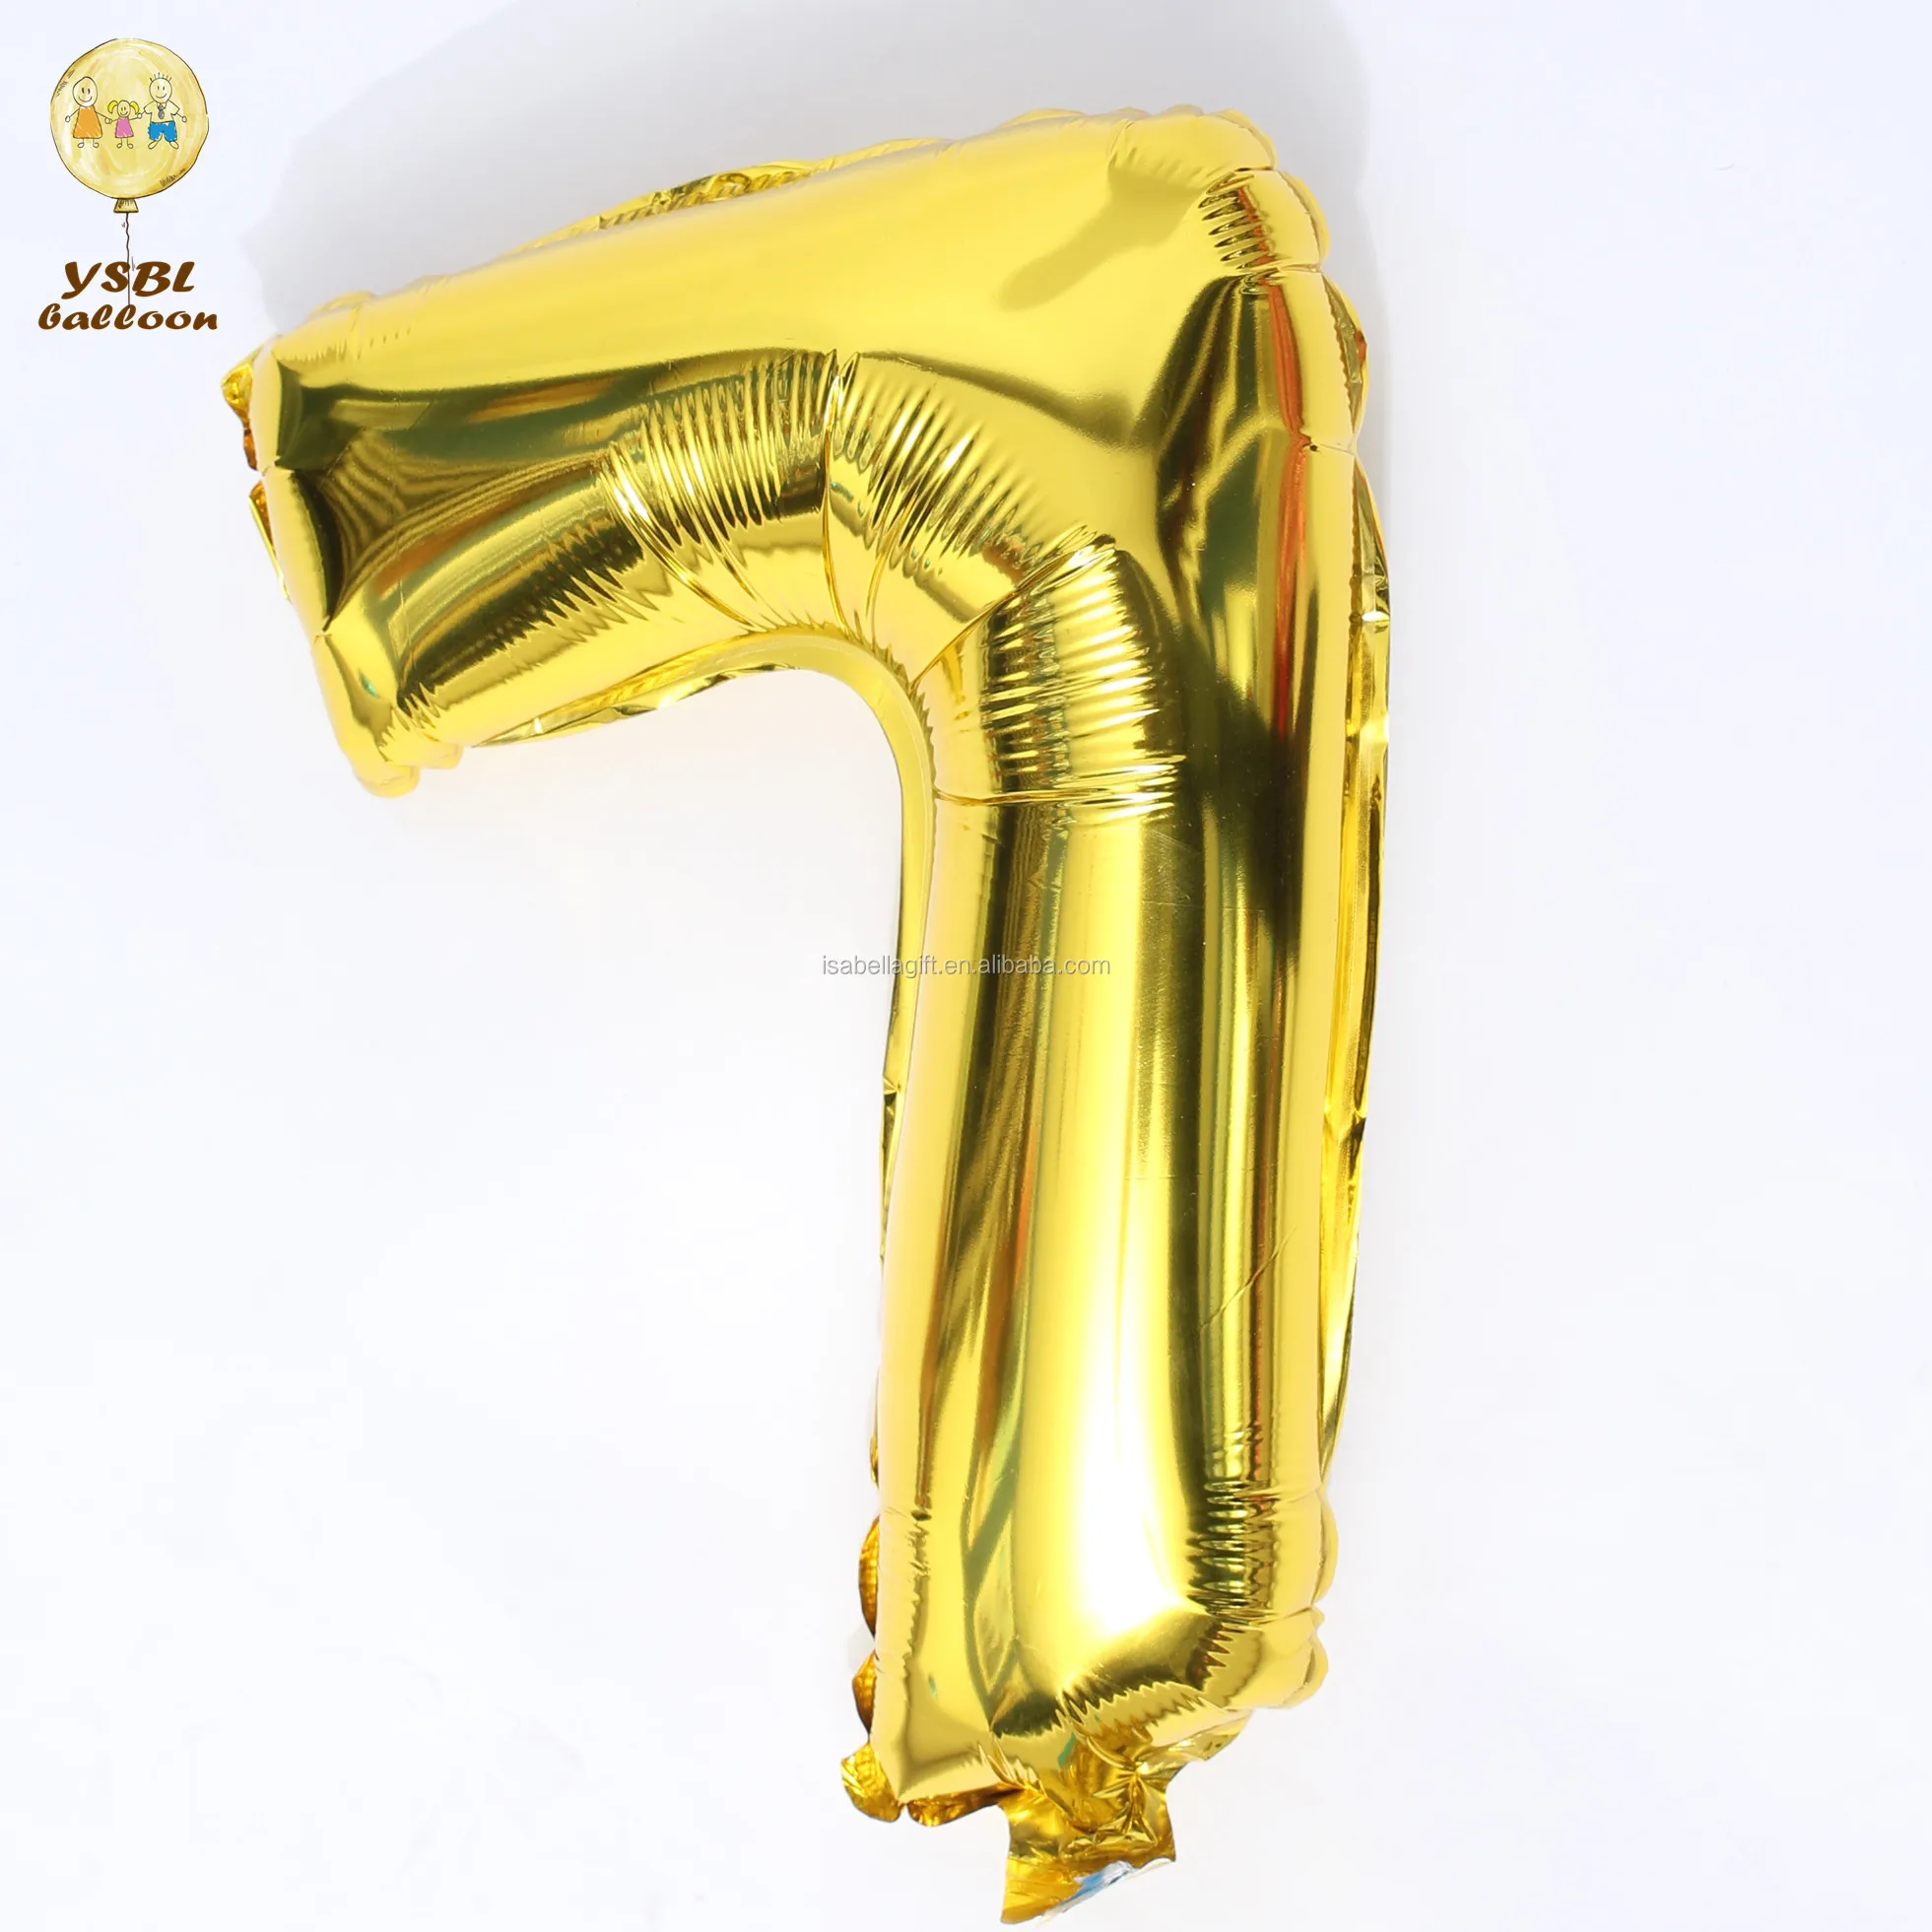 where to buy number shaped balloons